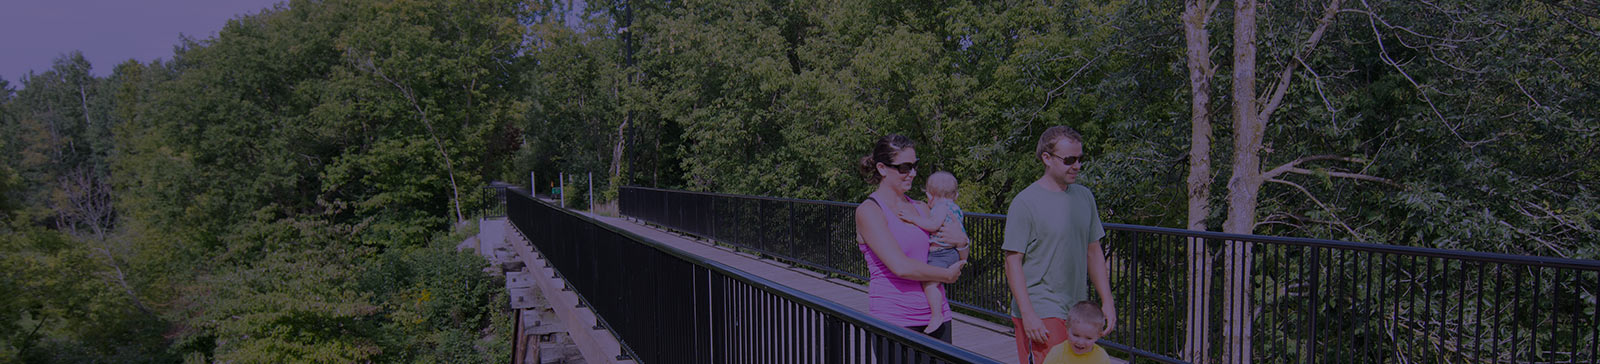 Family walking across a bridge in a forested area.